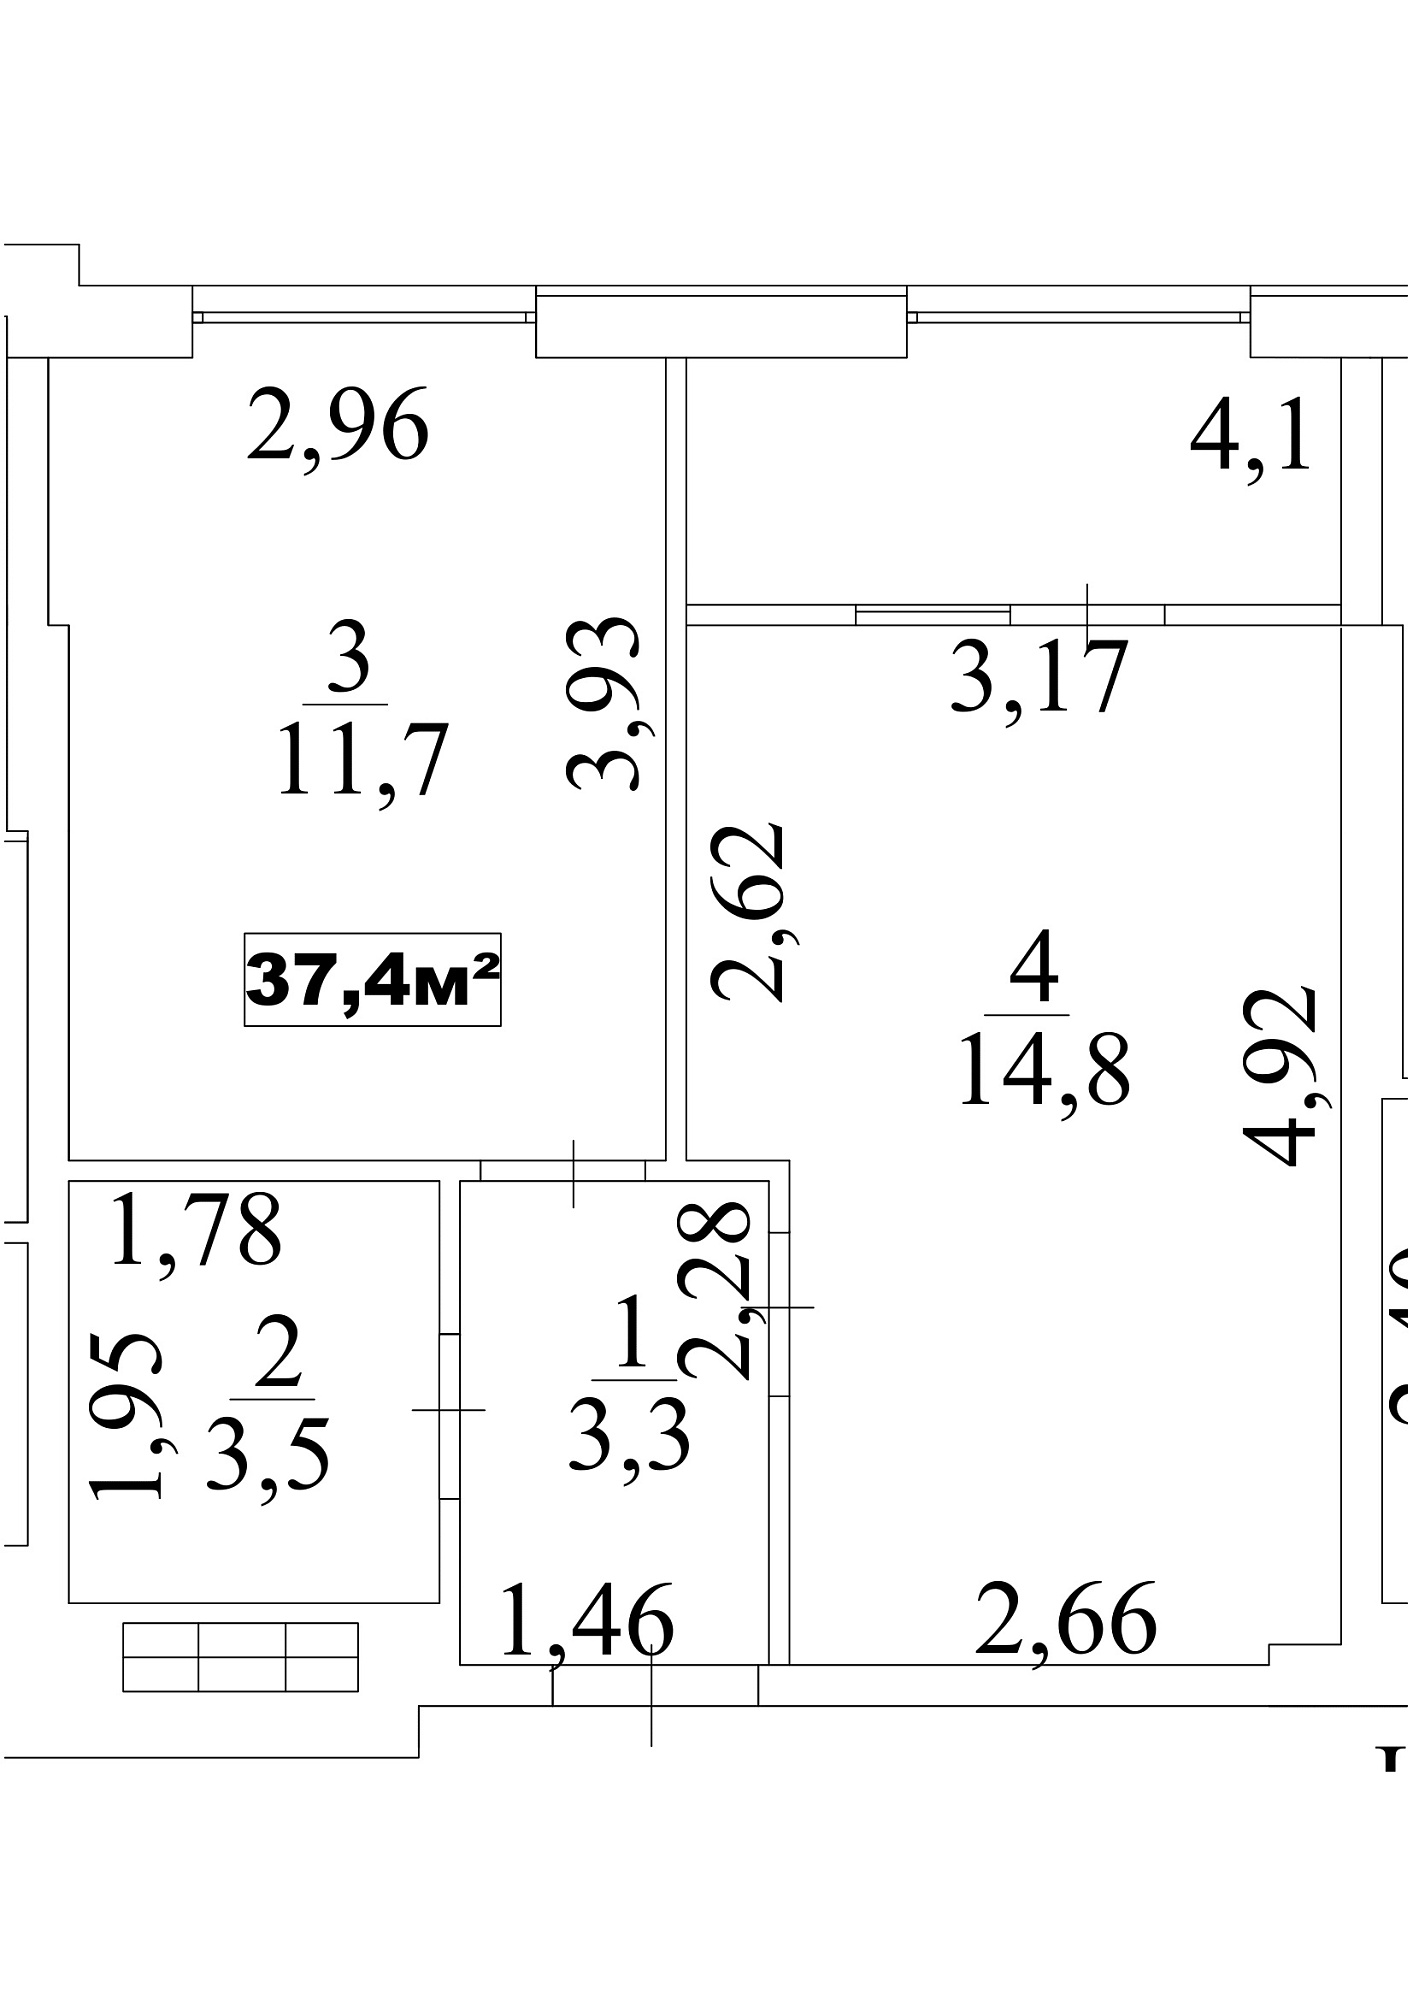 Planning 1-rm flats area 37.4m2, AB-10-04/00033.